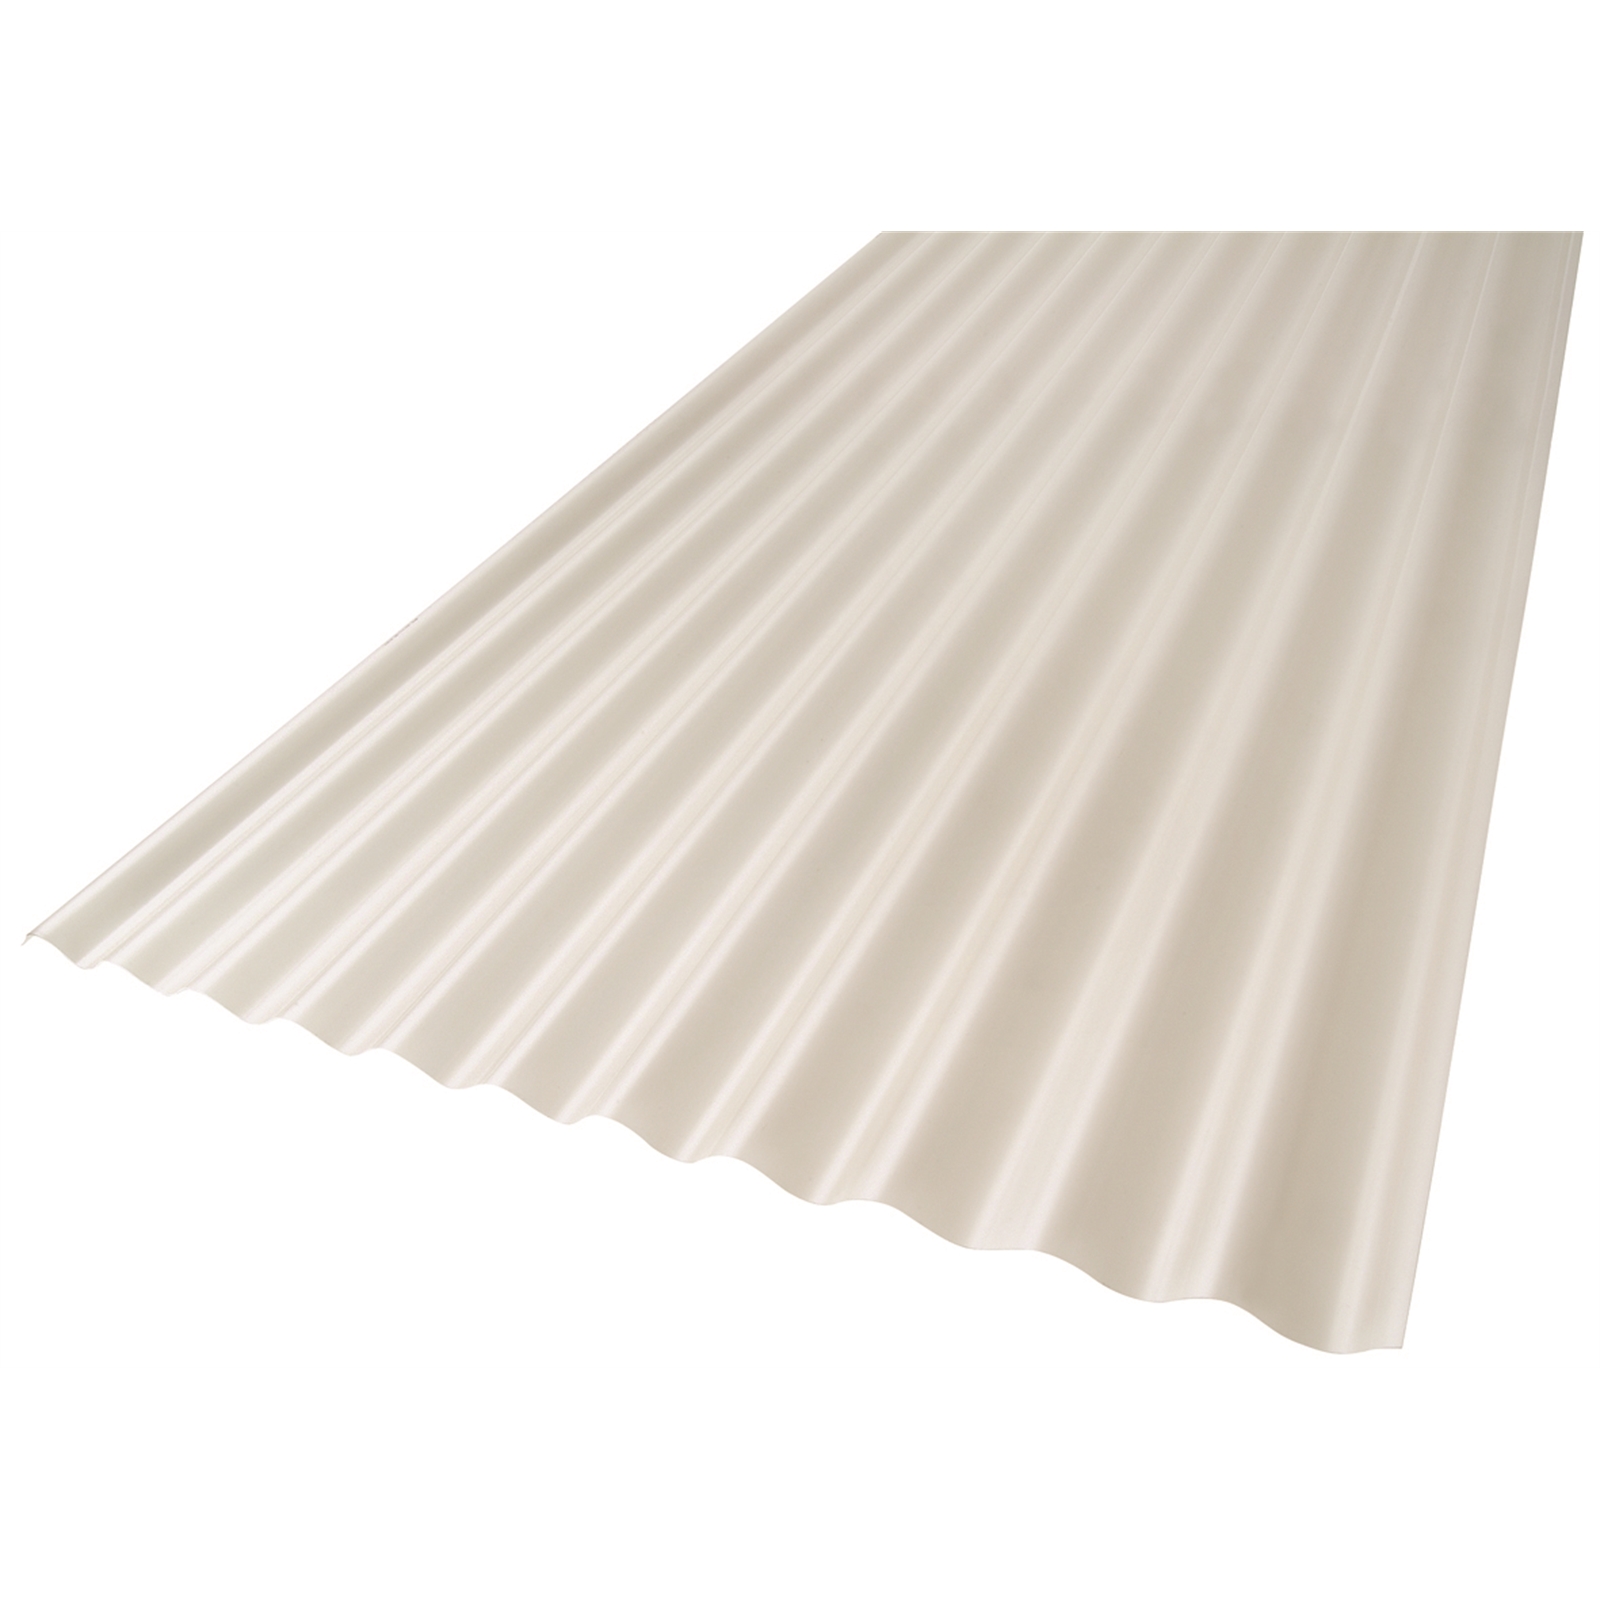 Suntuf Solarsmart 7.2m Diffused Ice Corrugated Polycarbonate Roofing